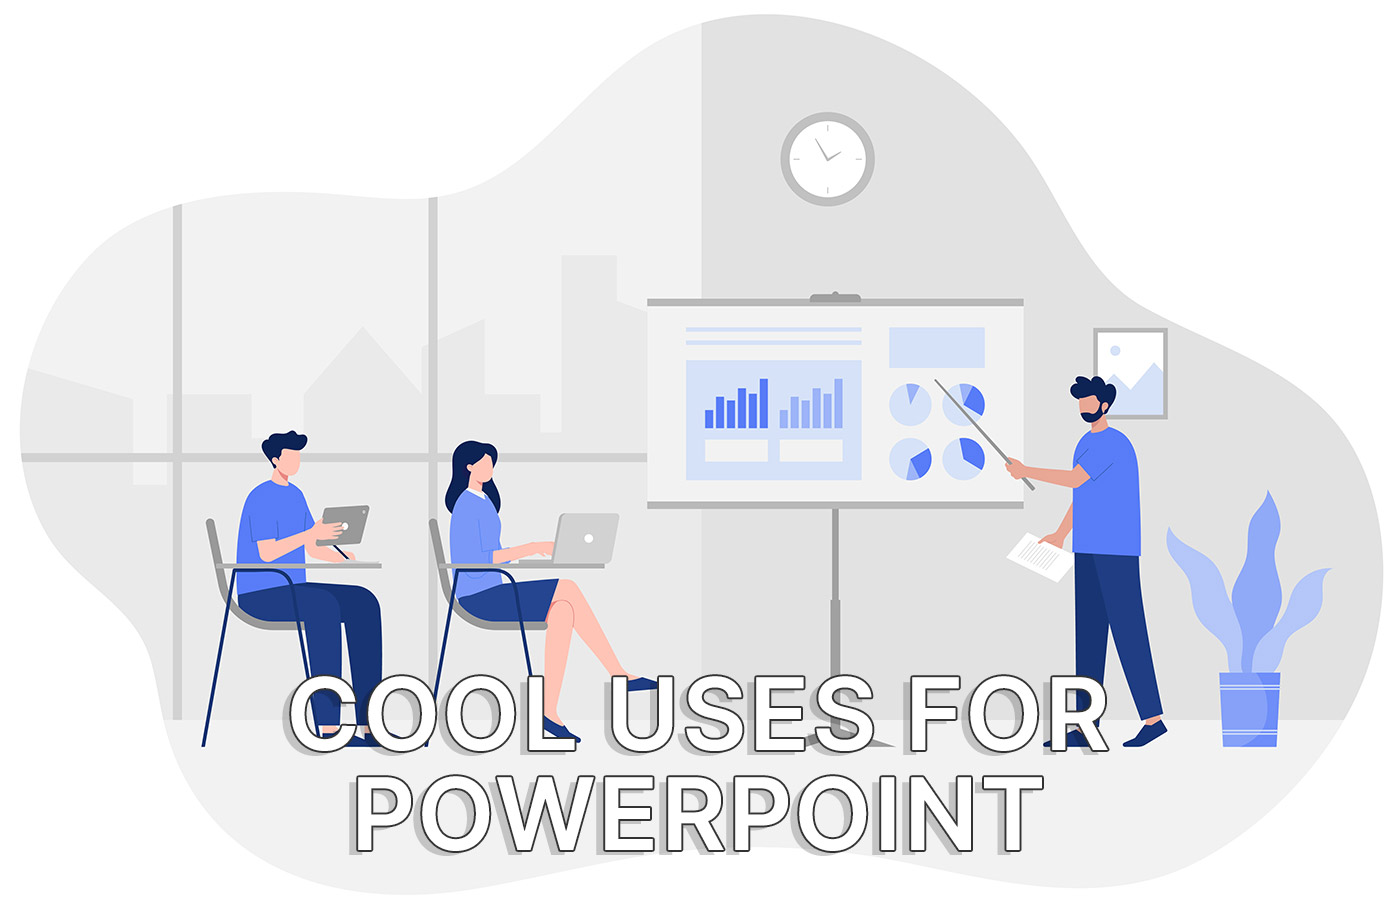 7 creative ways to use PowerPoint